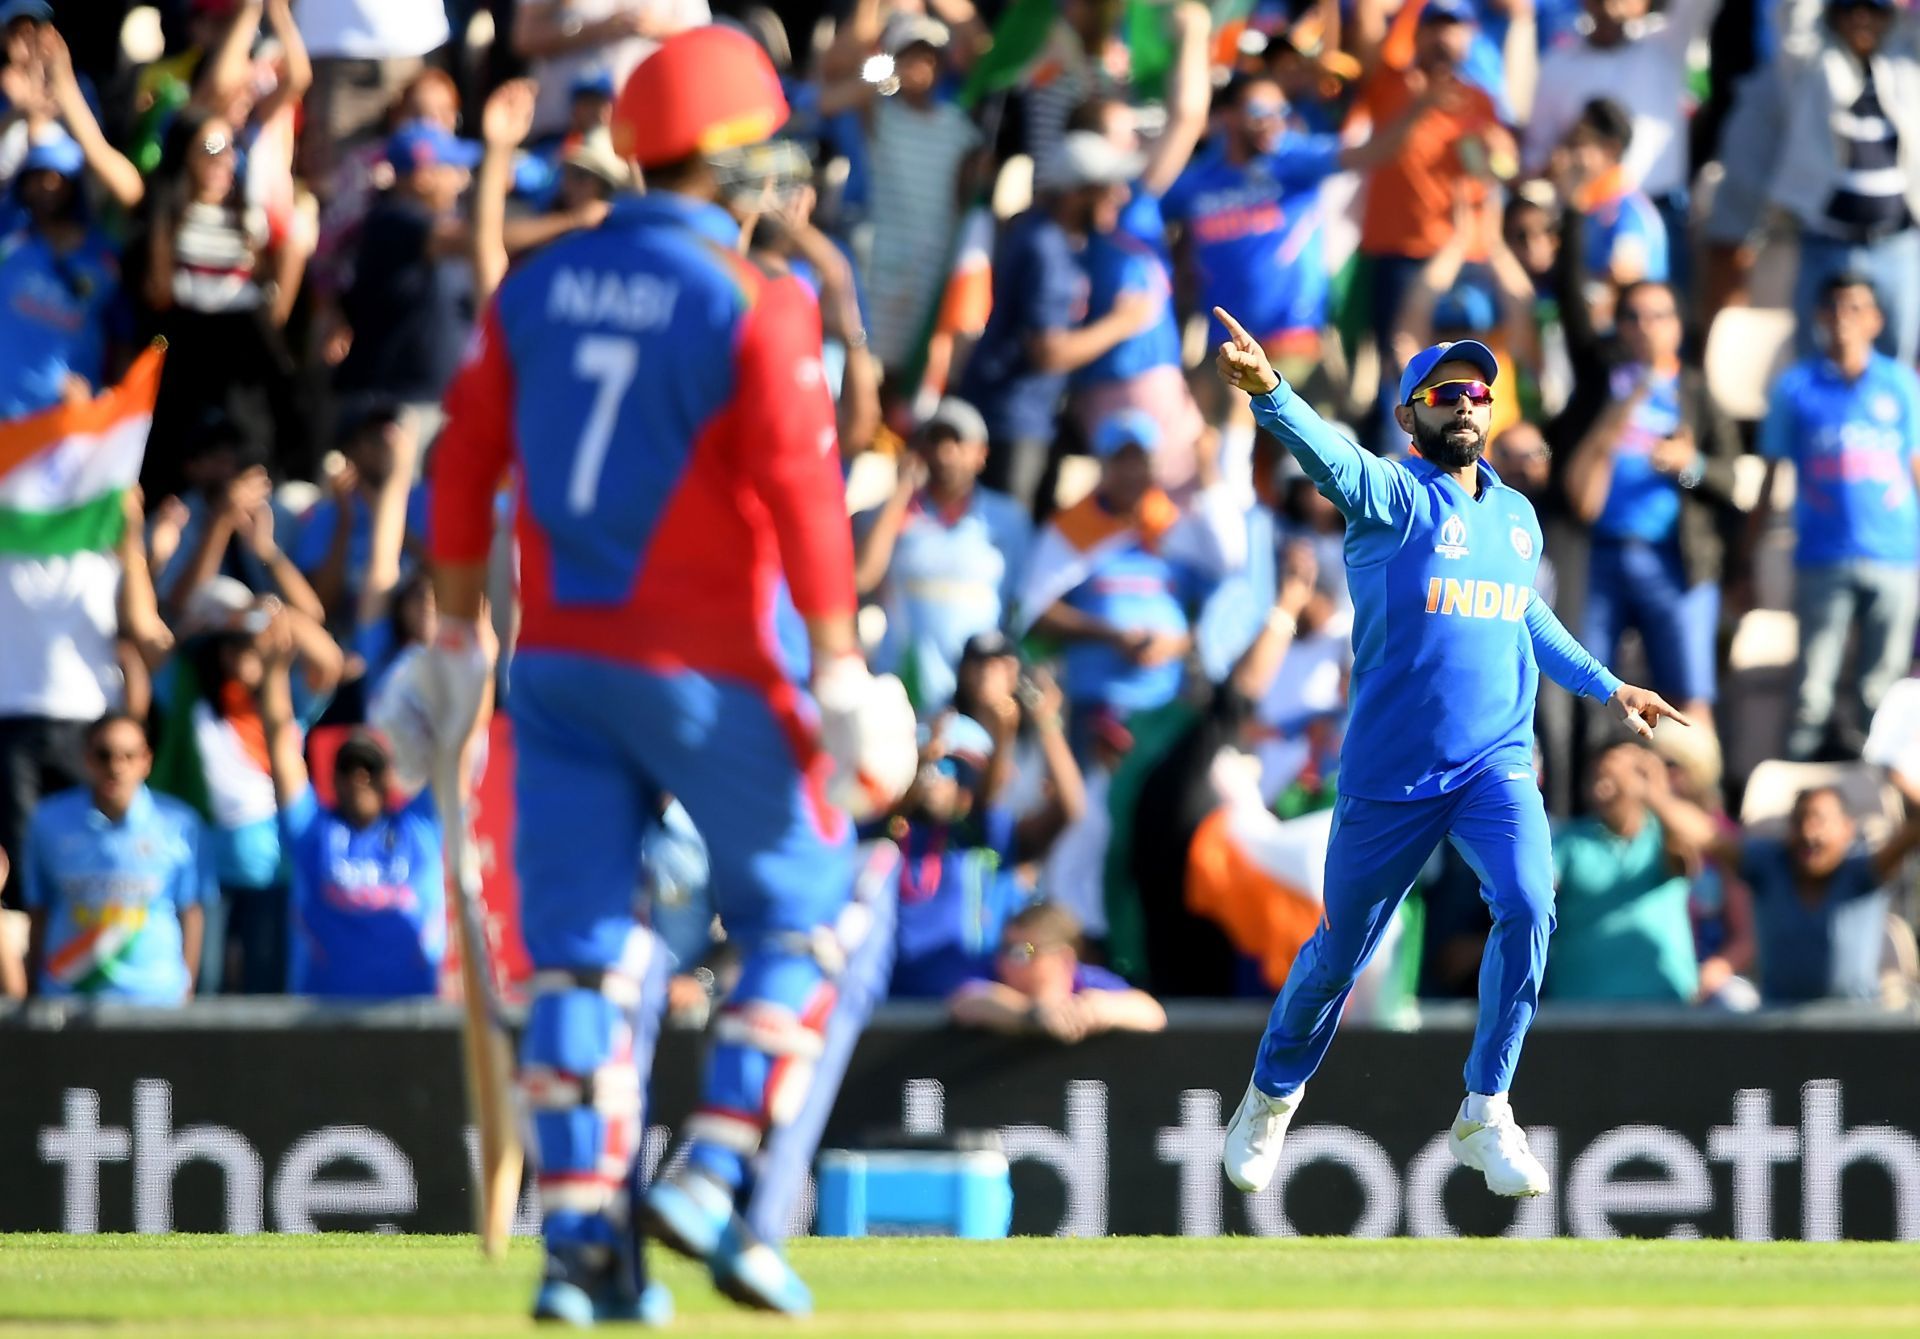 Afghanistan gave India a real scre at ICC Cricket World Cup 2019